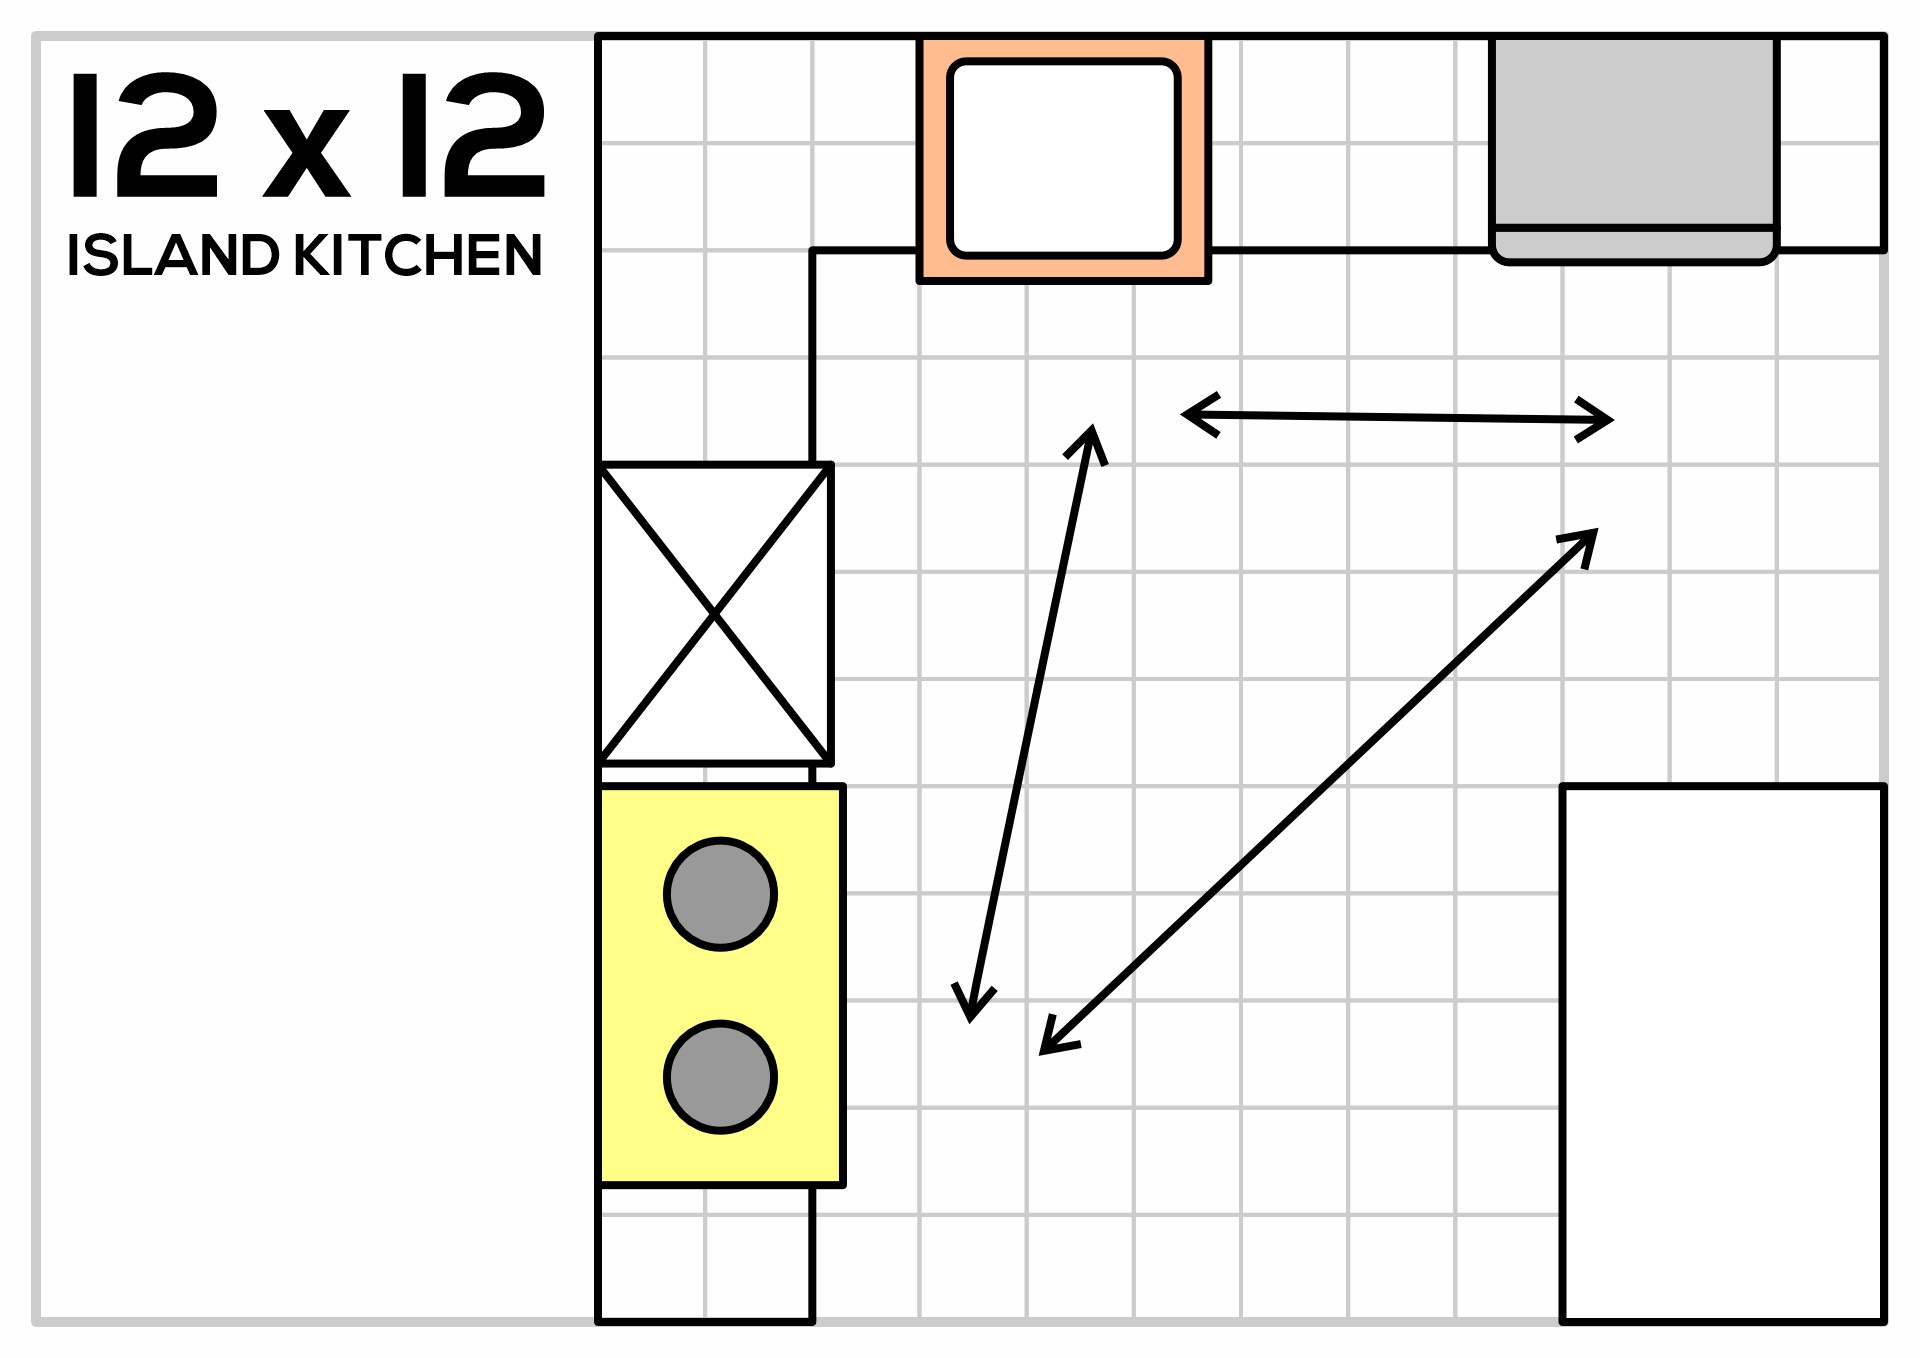 11 Best Images of 12 X 12 Kitchen Design - Small Kitchen Layout Plans